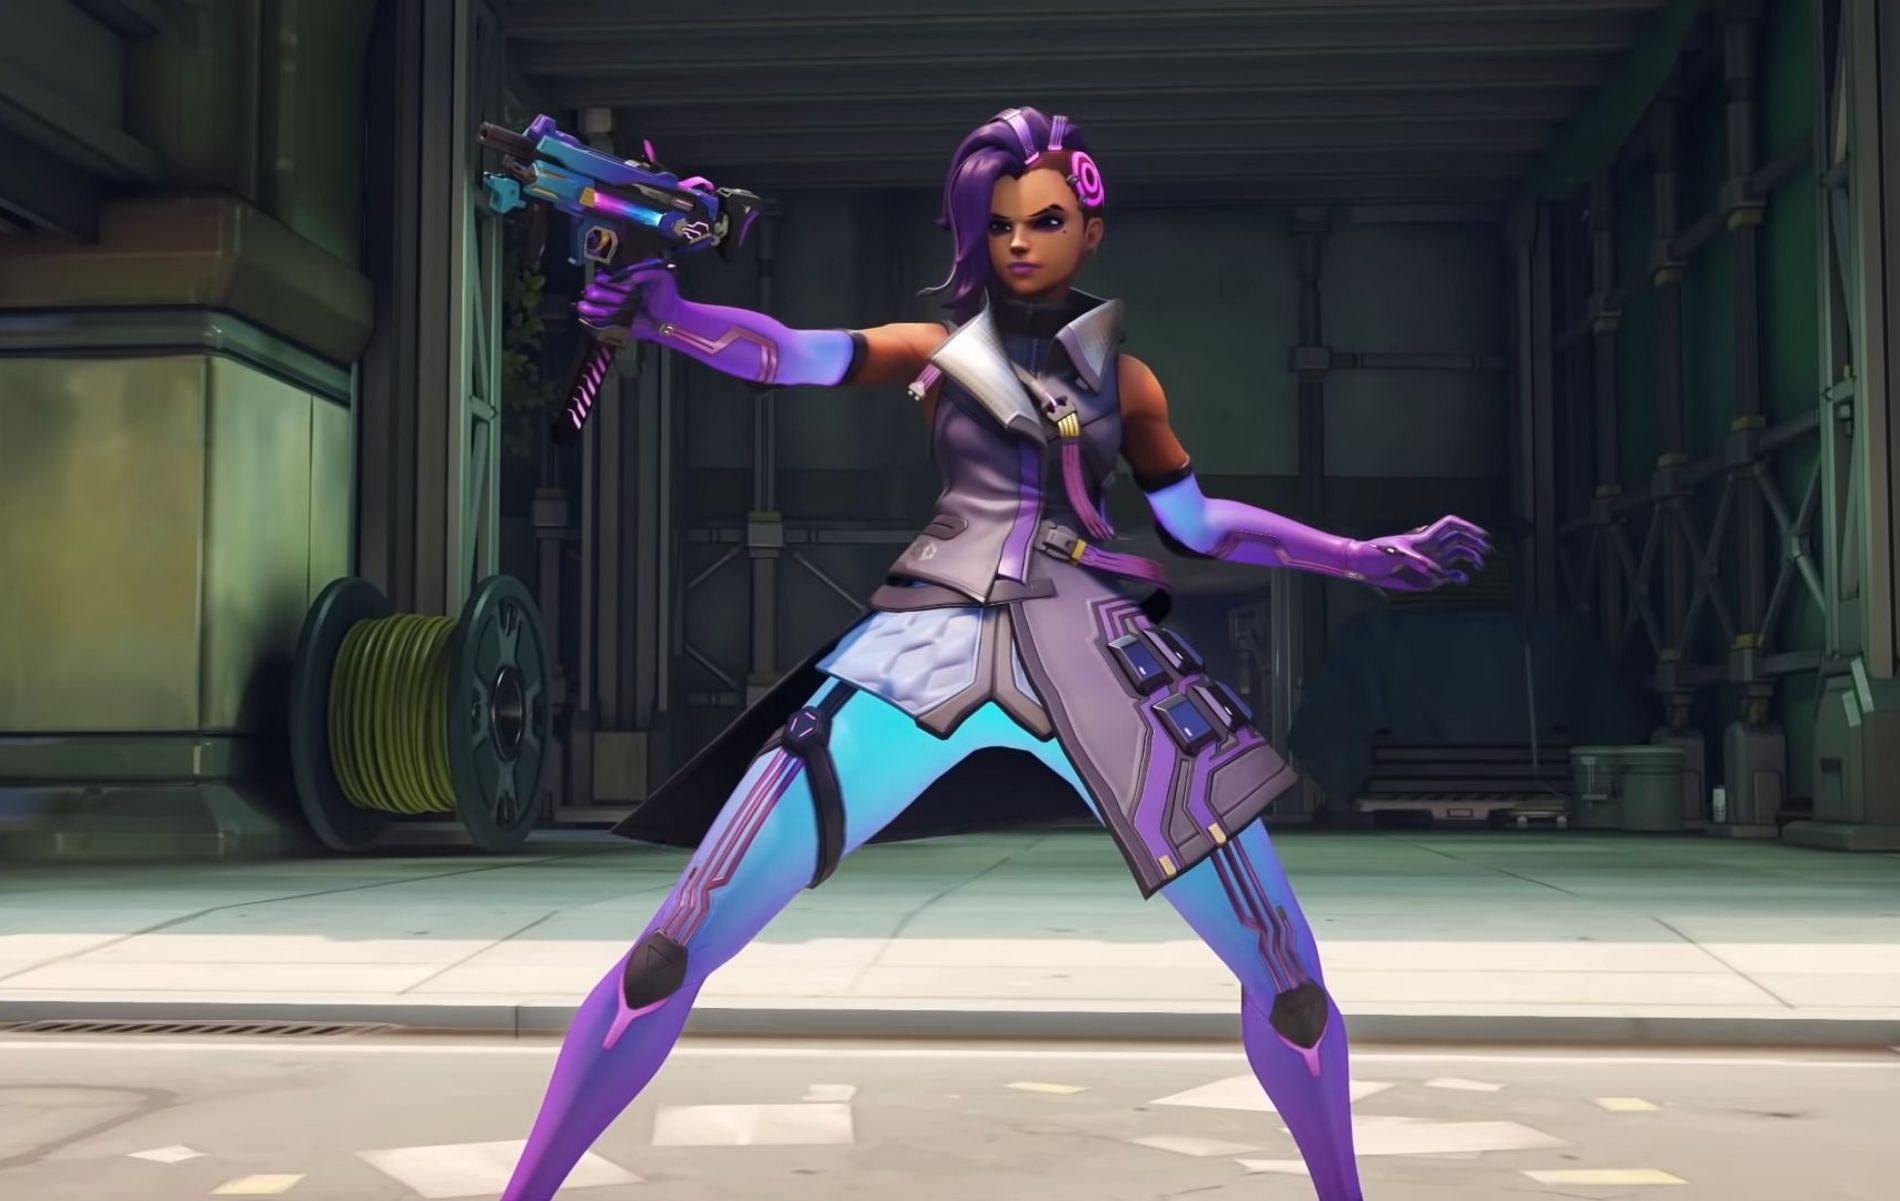 The revamped version of Sombra in Overwatch 2 makes her even deadlier (Image via Blizzard Entertainment)